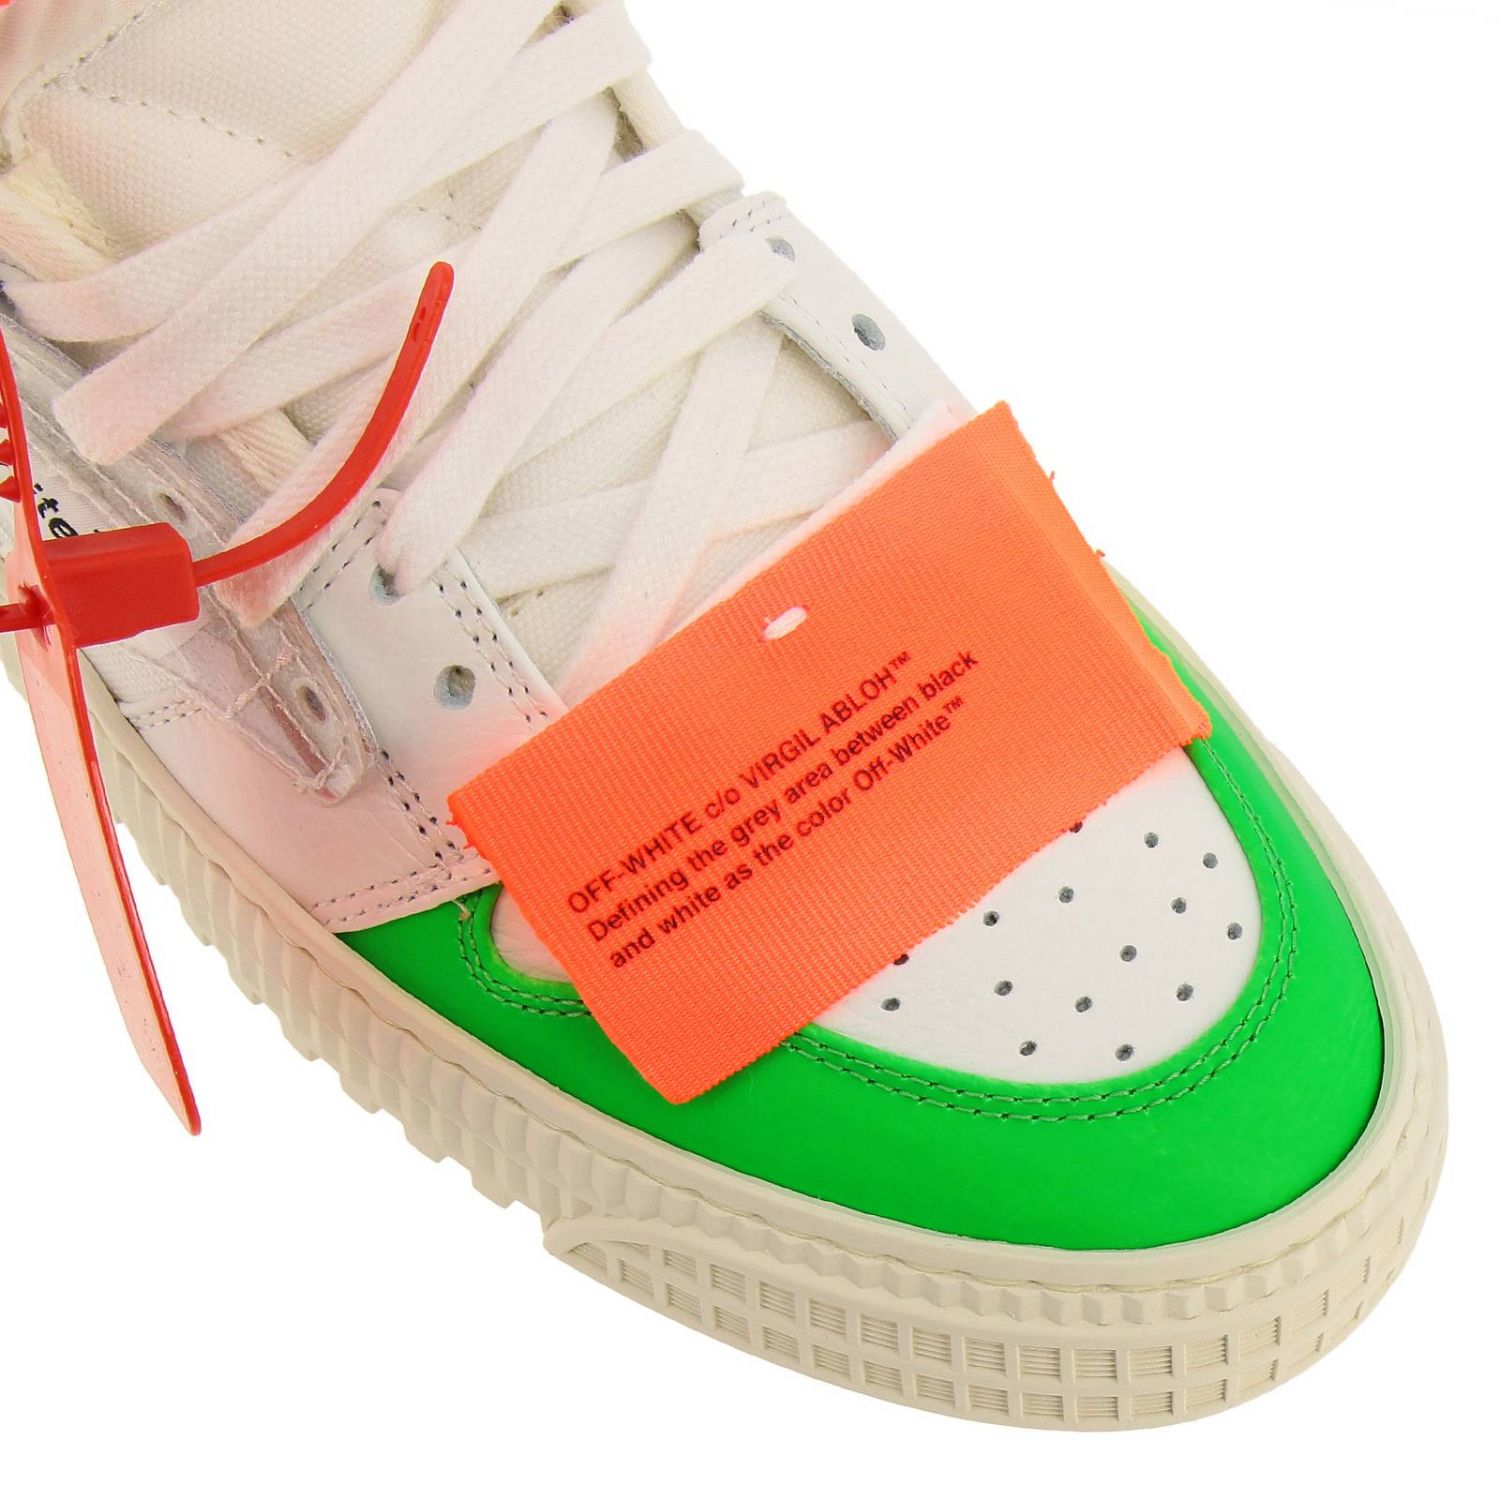 OFF-WHITE: sneakers for woman - White 1 | Off-White sneakers ...